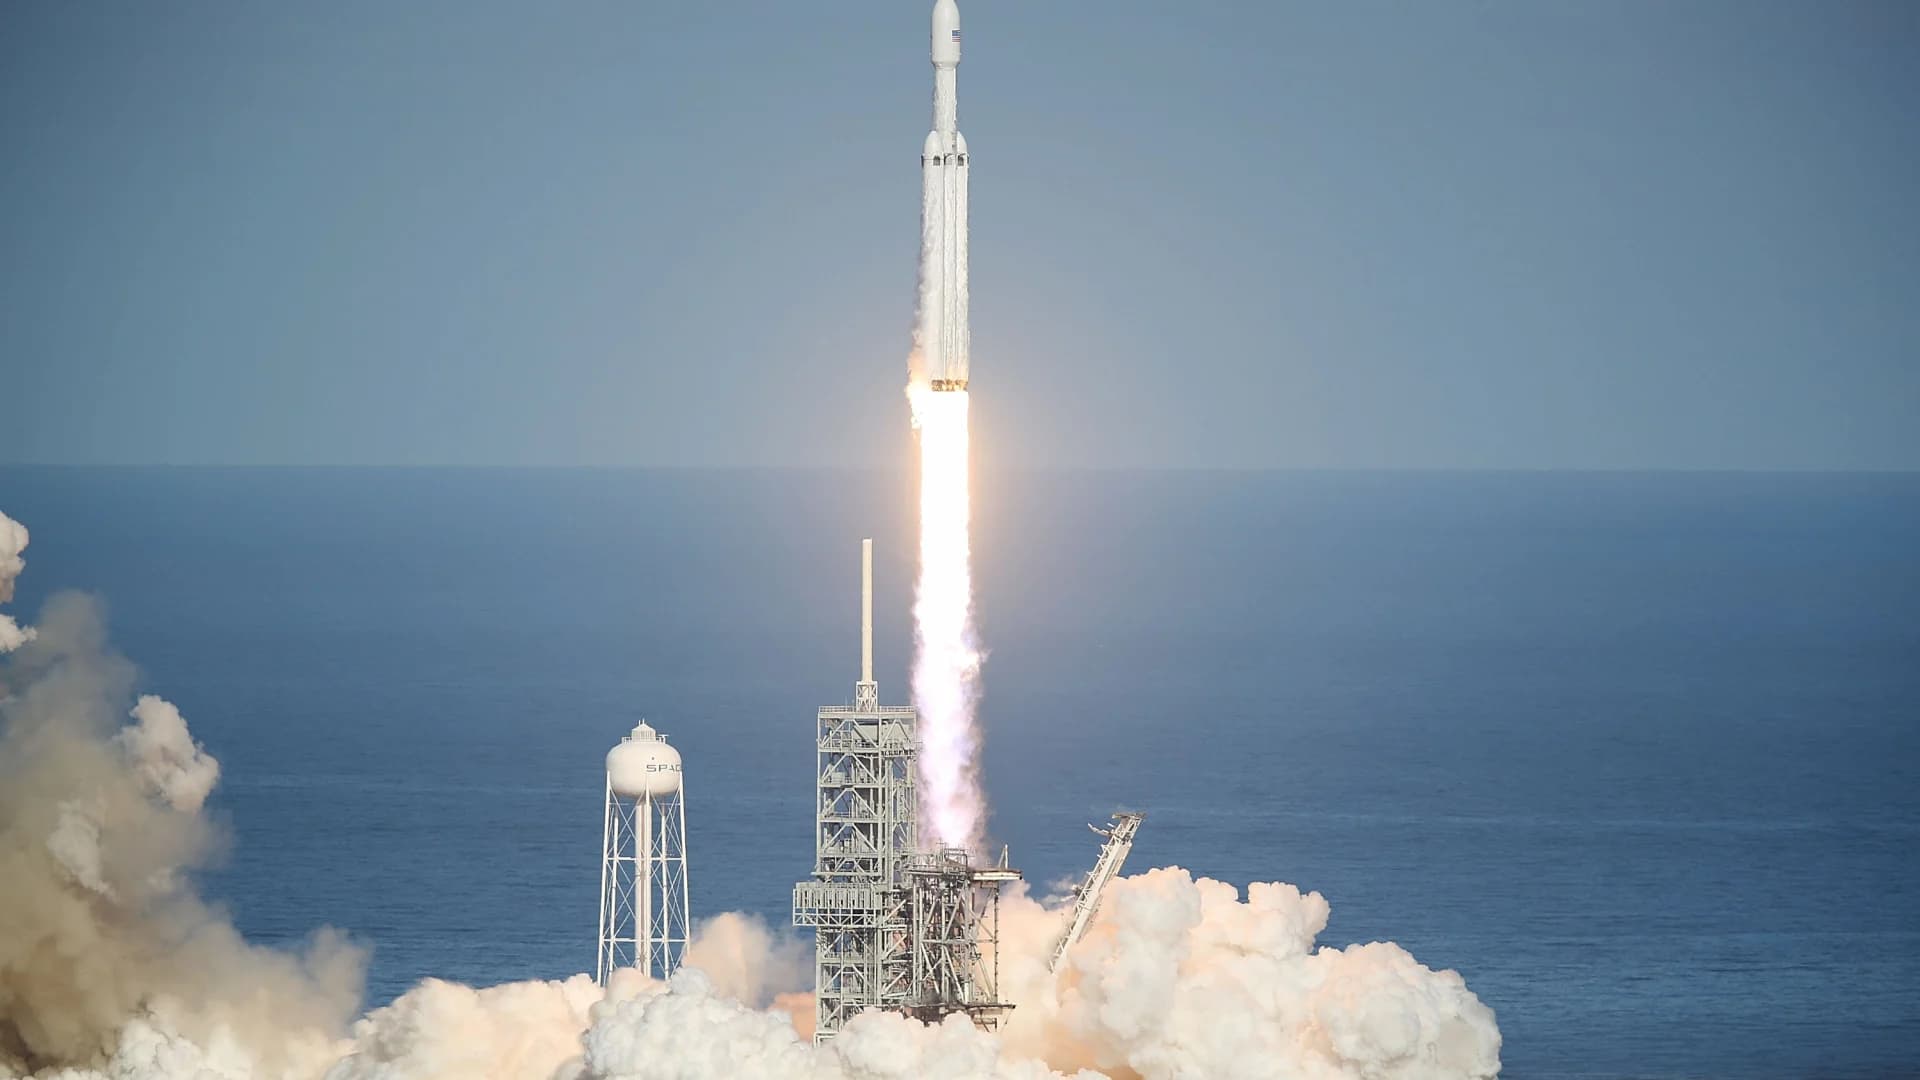 WATCH: Video of the SpaceX Falcon Heavy rocket launch